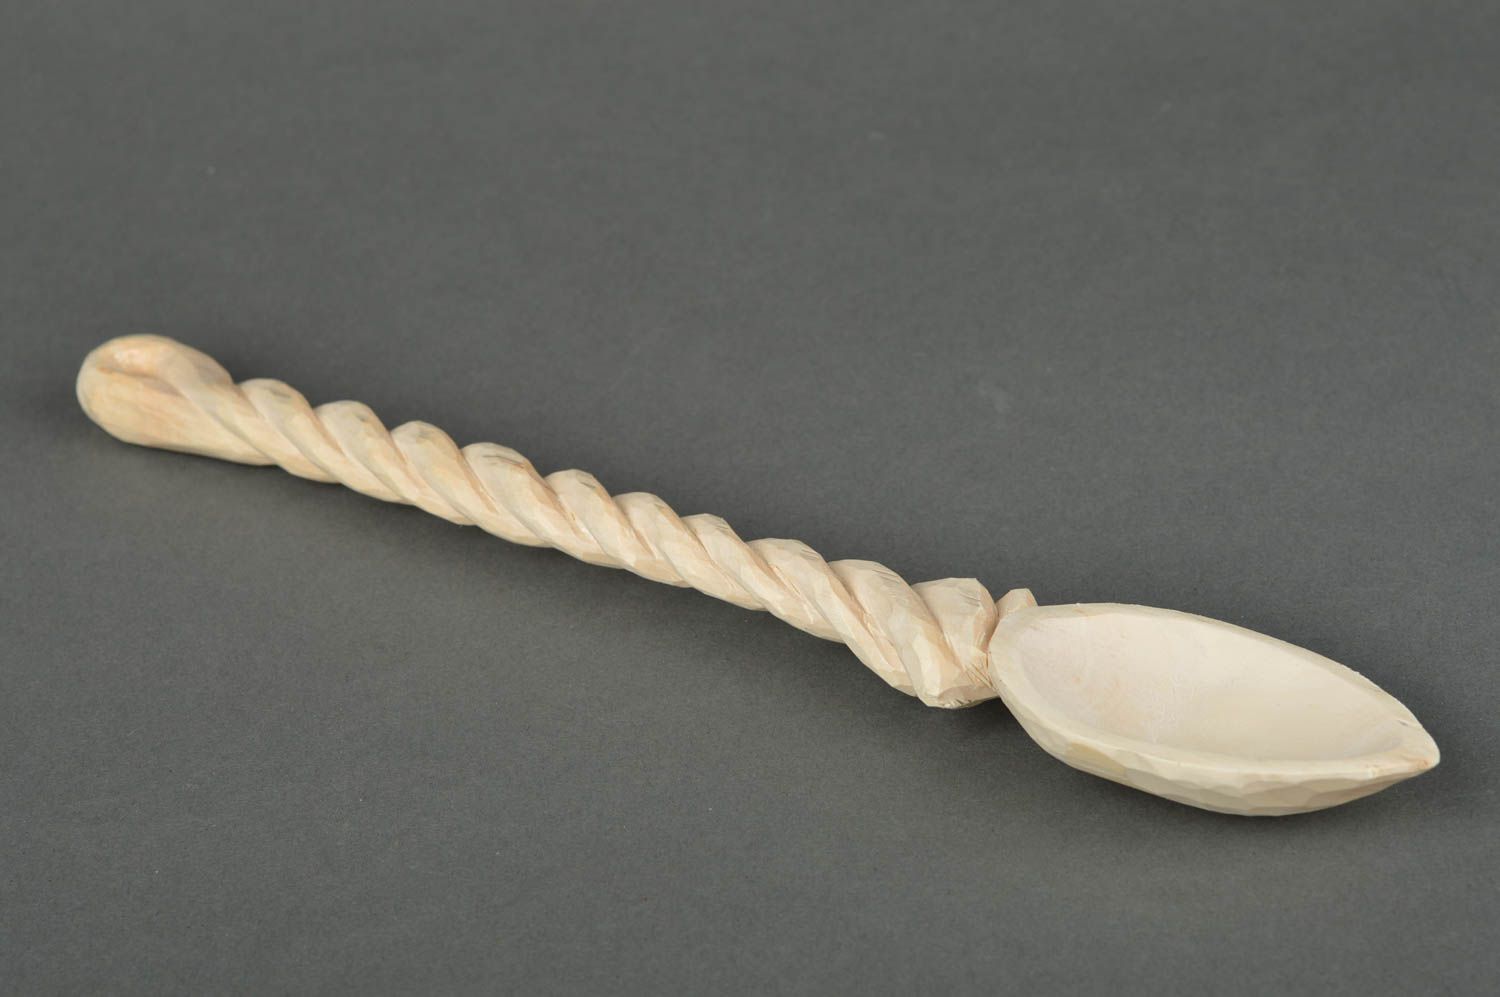 Handmade wooden souvenir white long wooden spoon decorative use only home decor photo 1